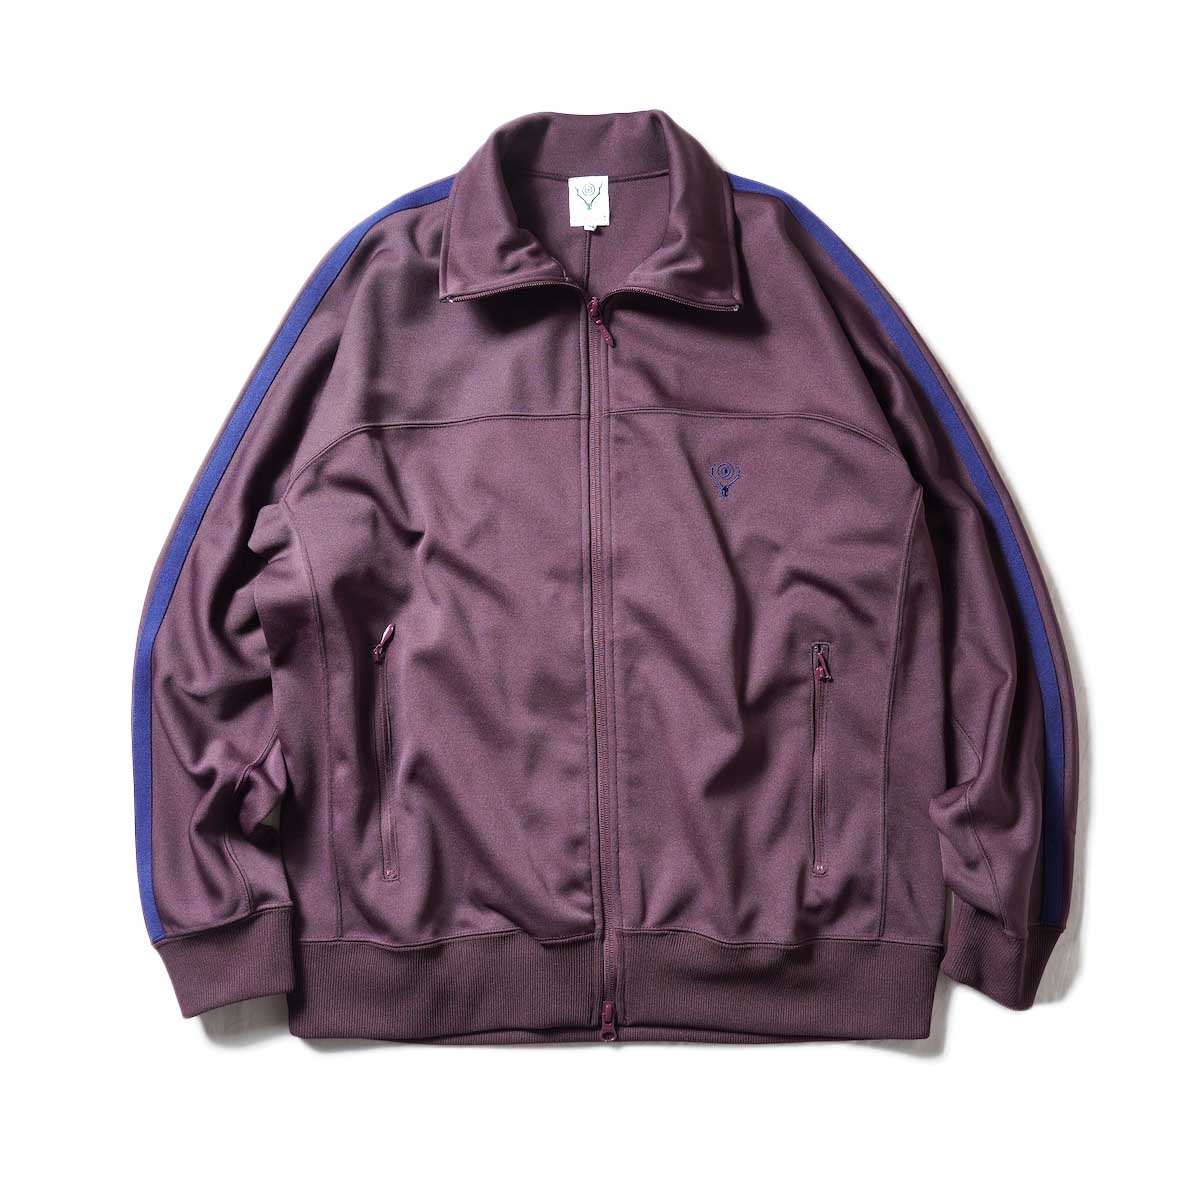 South2 West8 / Trainer jacket - Poly Smooth (Burgundy)